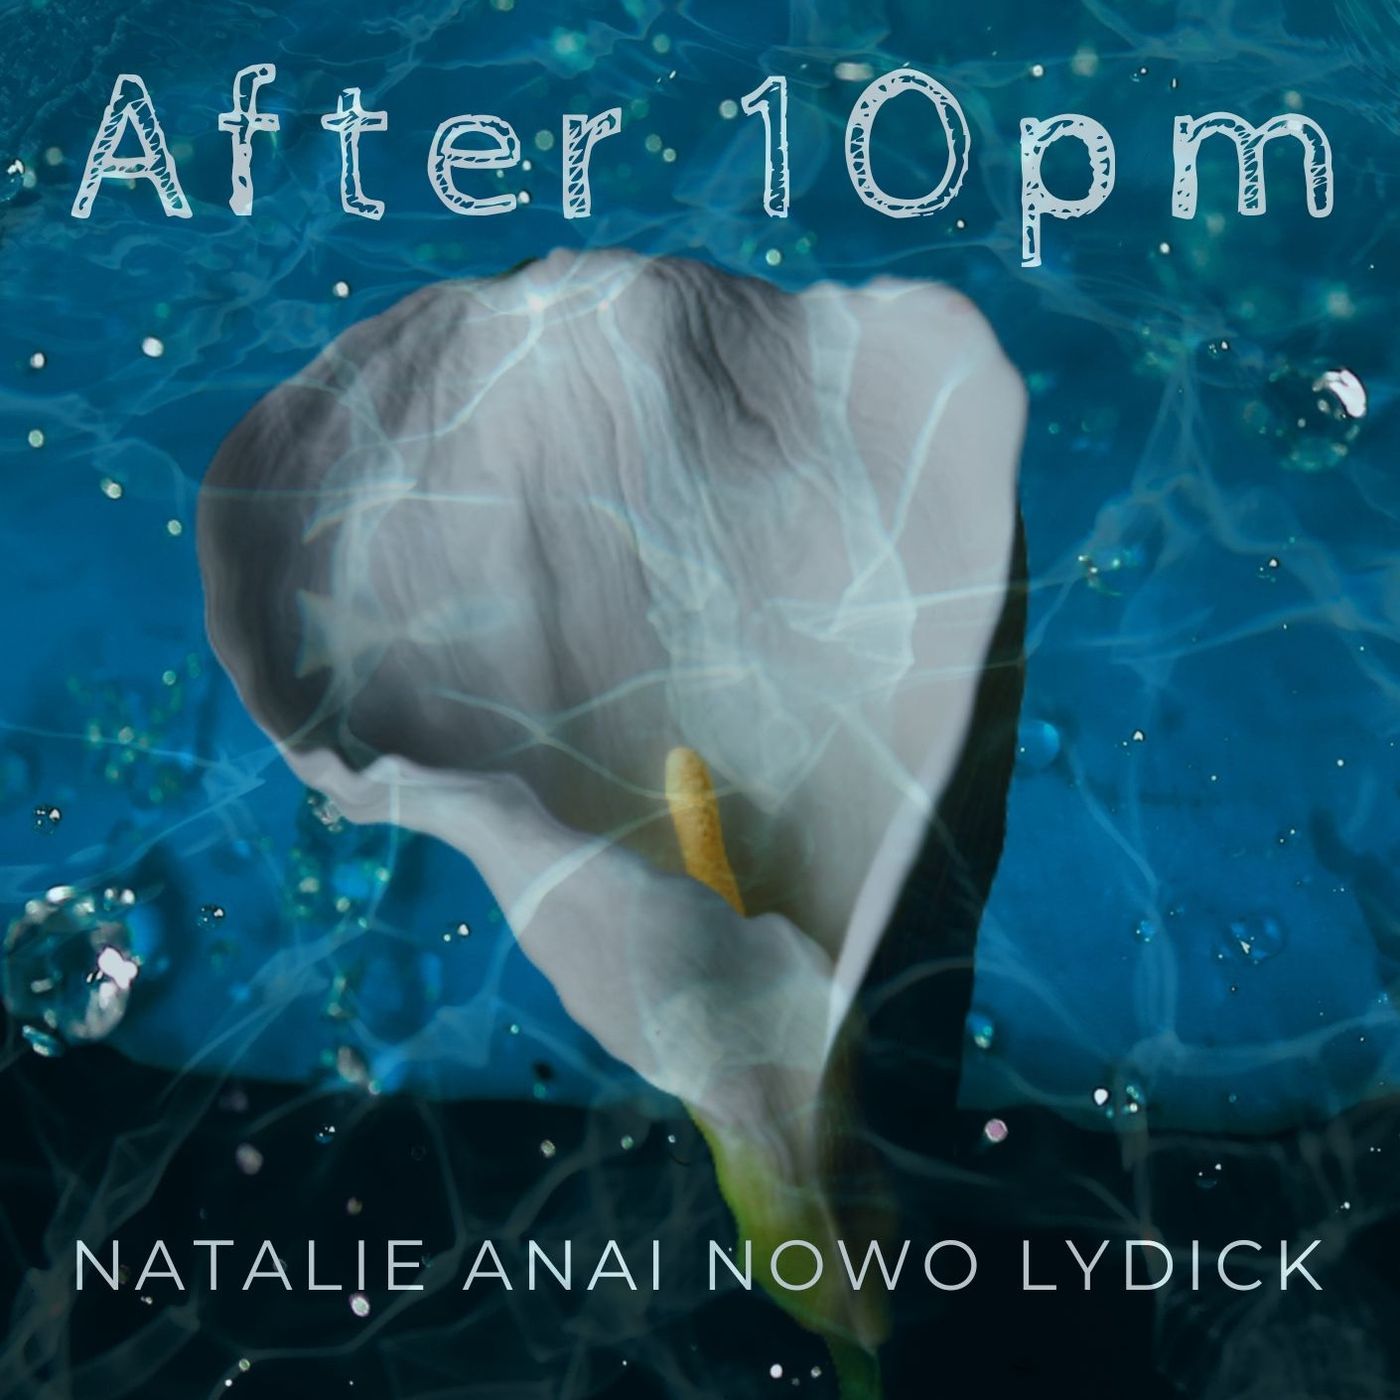 After 10pm - a story by Natalie Anai Nowo Lydick